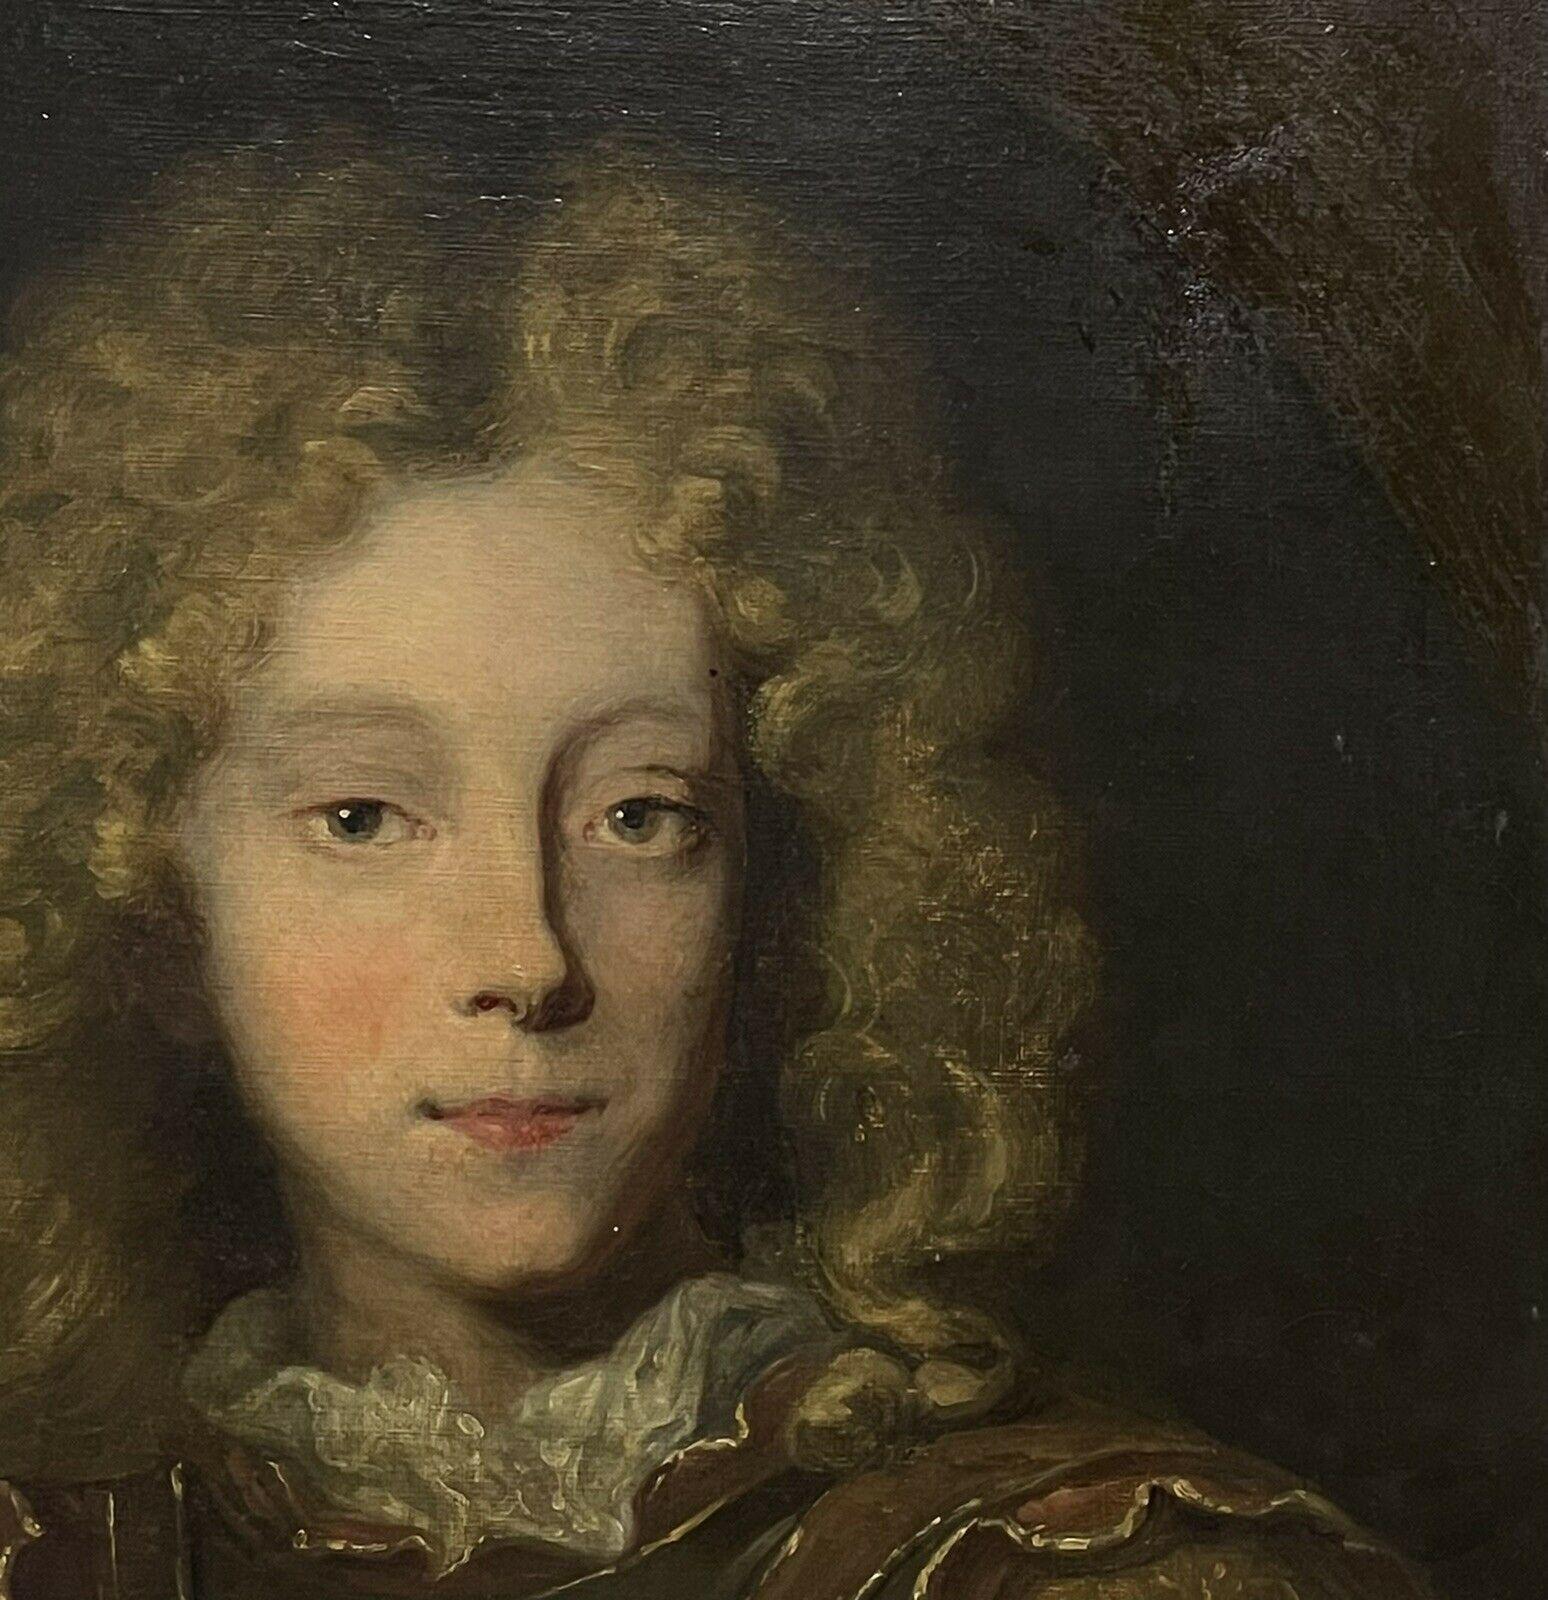 Antique French Oil Portrait of a Young Nobleman/ Prince - Black Figurative Painting by Unknown